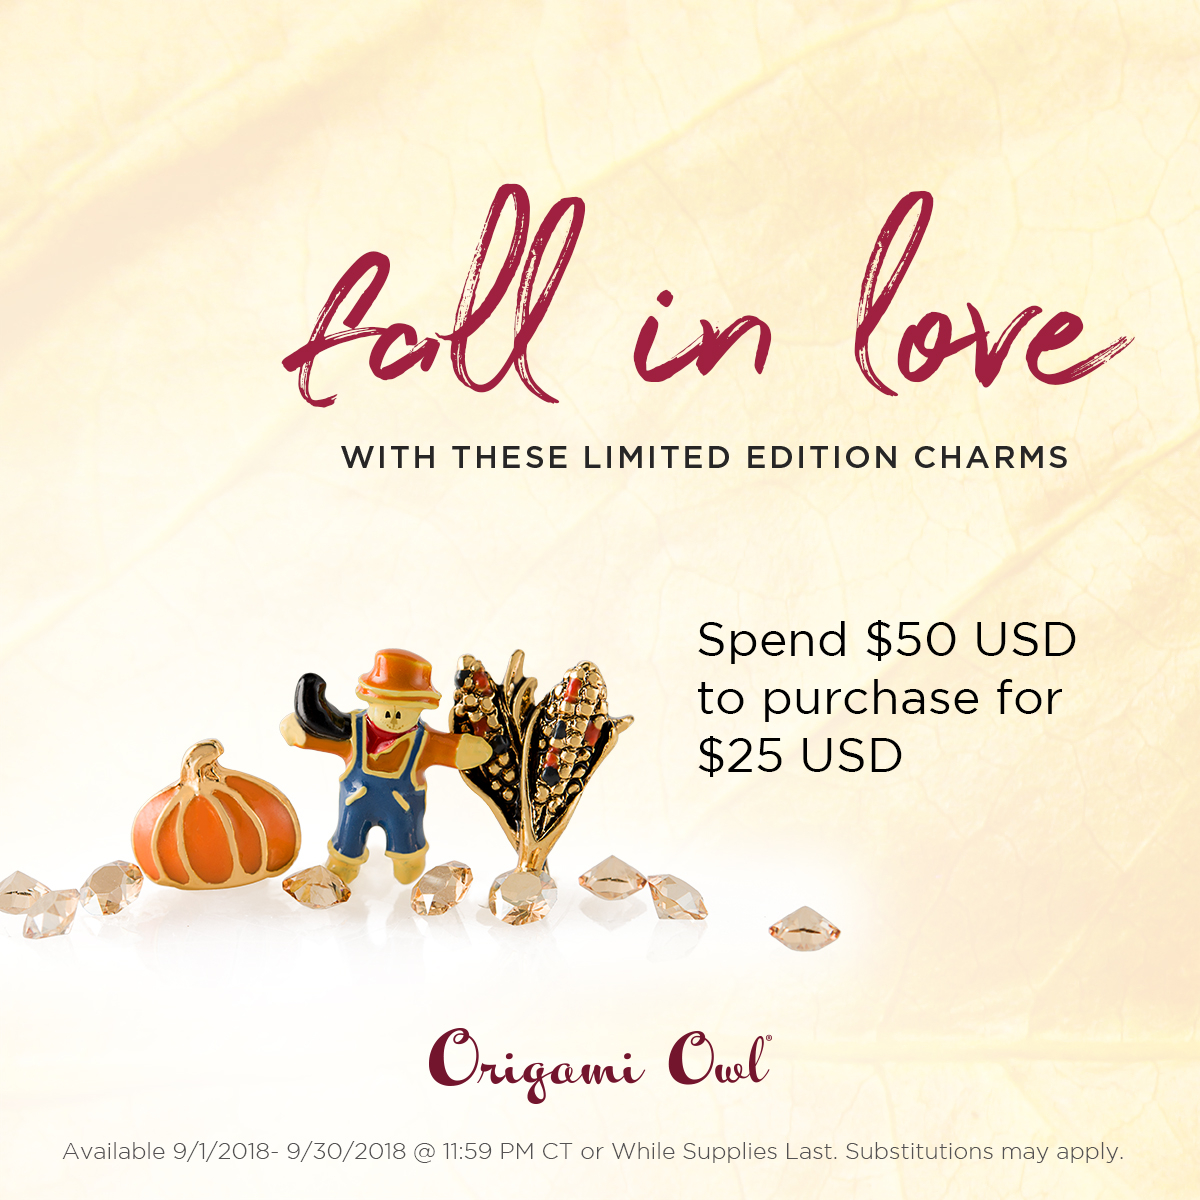 Where To Buy Origami Owl September 2018 Origami Owl Exclusives And Specials Locket